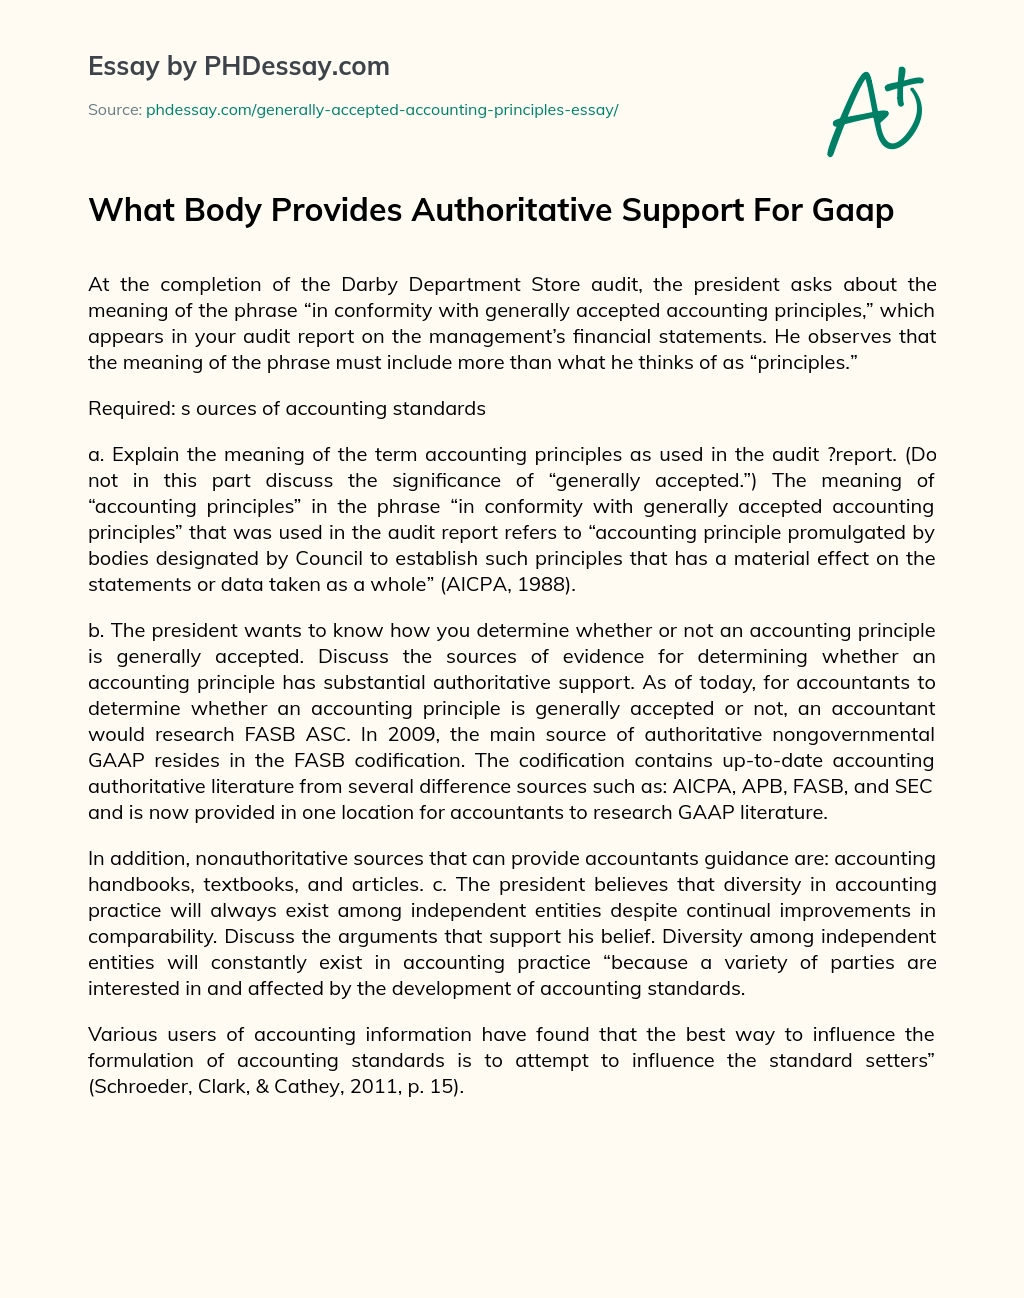 What Body Provides Authoritative Support For Gaap essay